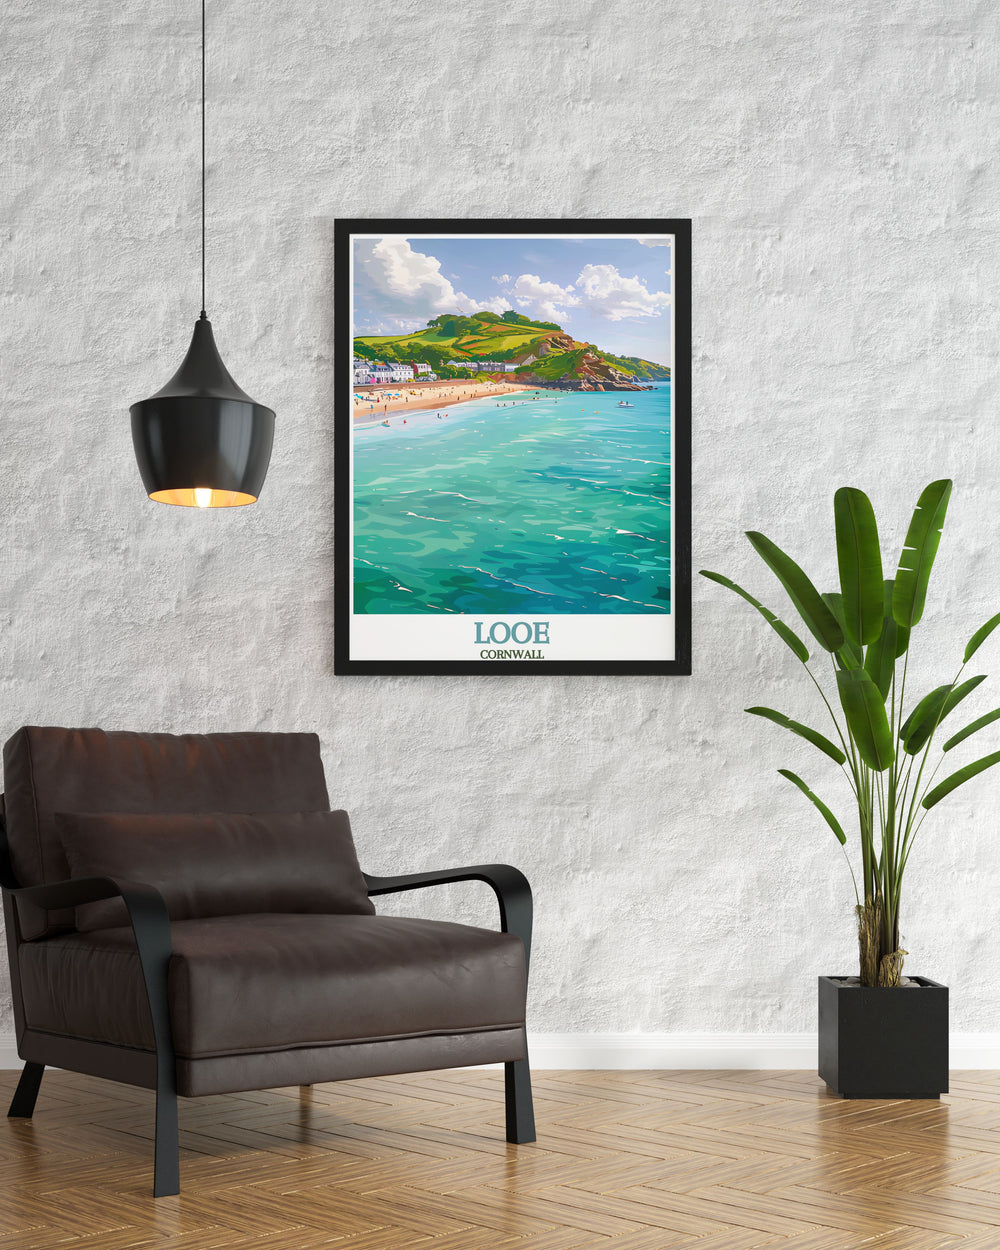 Beautiful East Looe Beach modern prints featuring vibrant colors and detailed illustration of the picturesque Looe Cornwall coastline a stunning addition to any living room decor and an elegant gift for those who adore Cornwall.